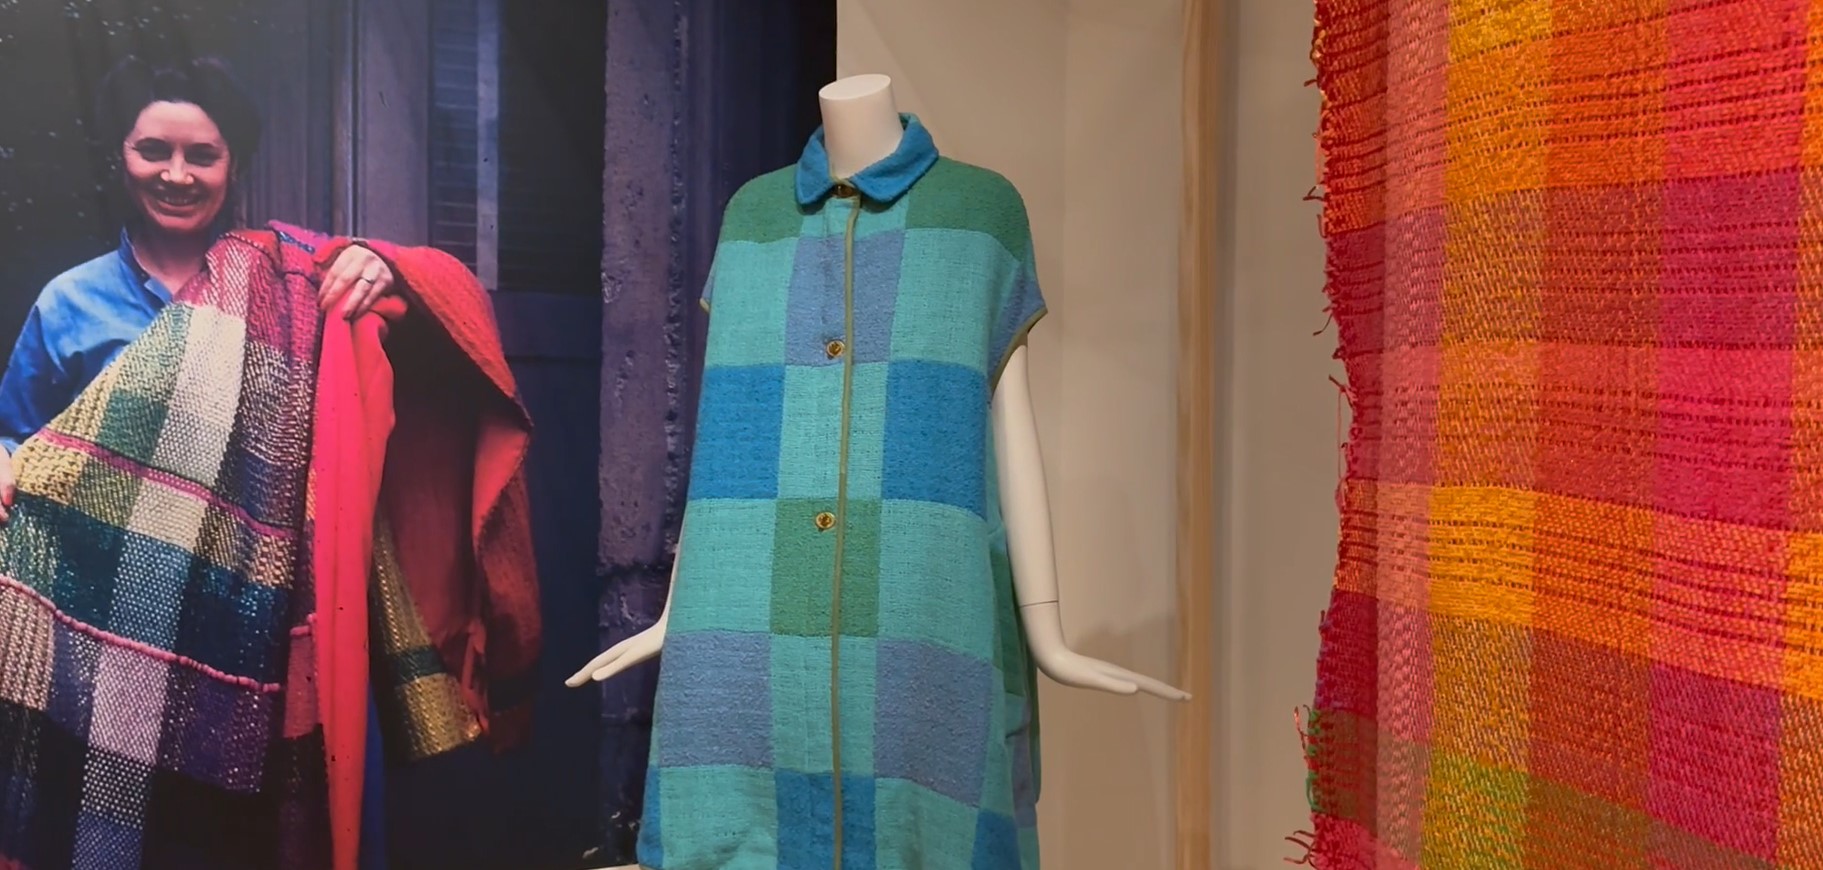 Design by Bonnie Cashin, fabric by Dorothy Liebes, Cape, 1968. Wool double-cloth, leather trim. Cooper Hewitt, Smithsonian Design Museum. Courtesy of Don Wood. Photo by the Decorative Arts Trust.